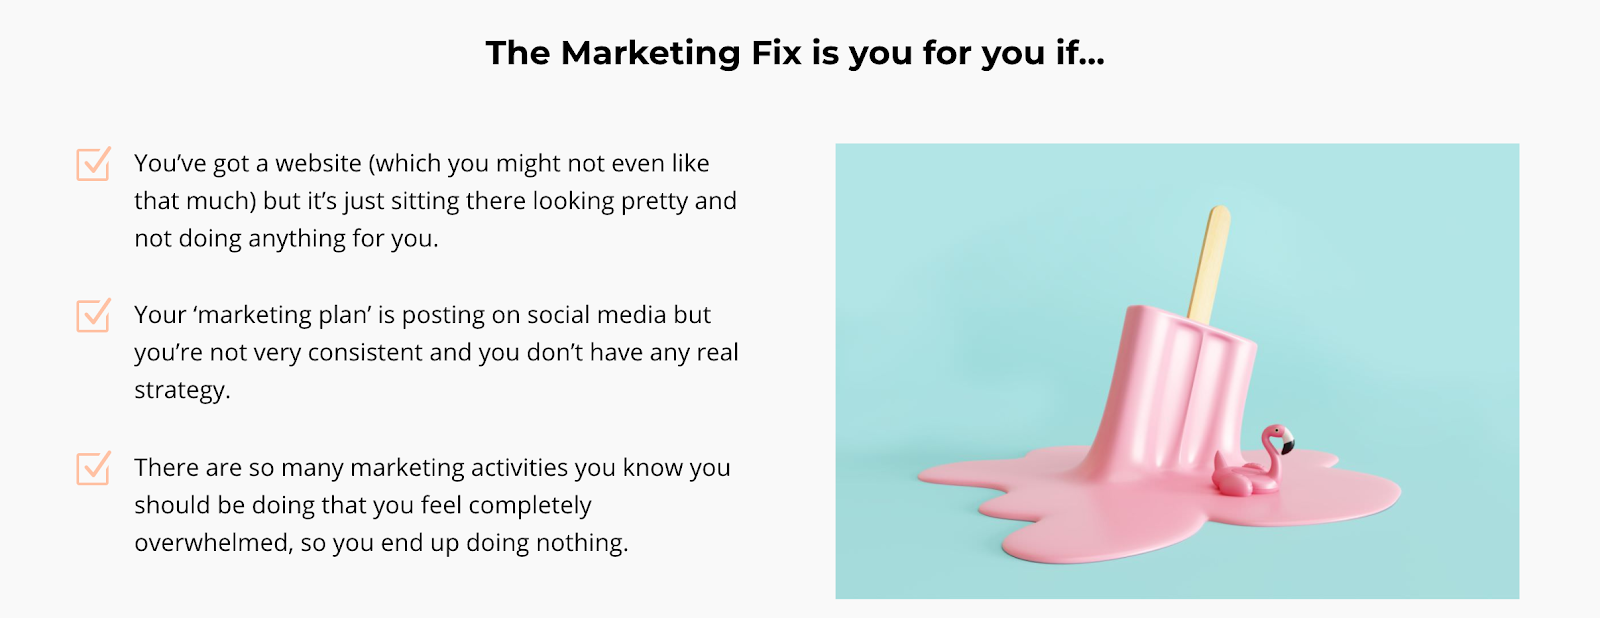 the marketing fix is for you if